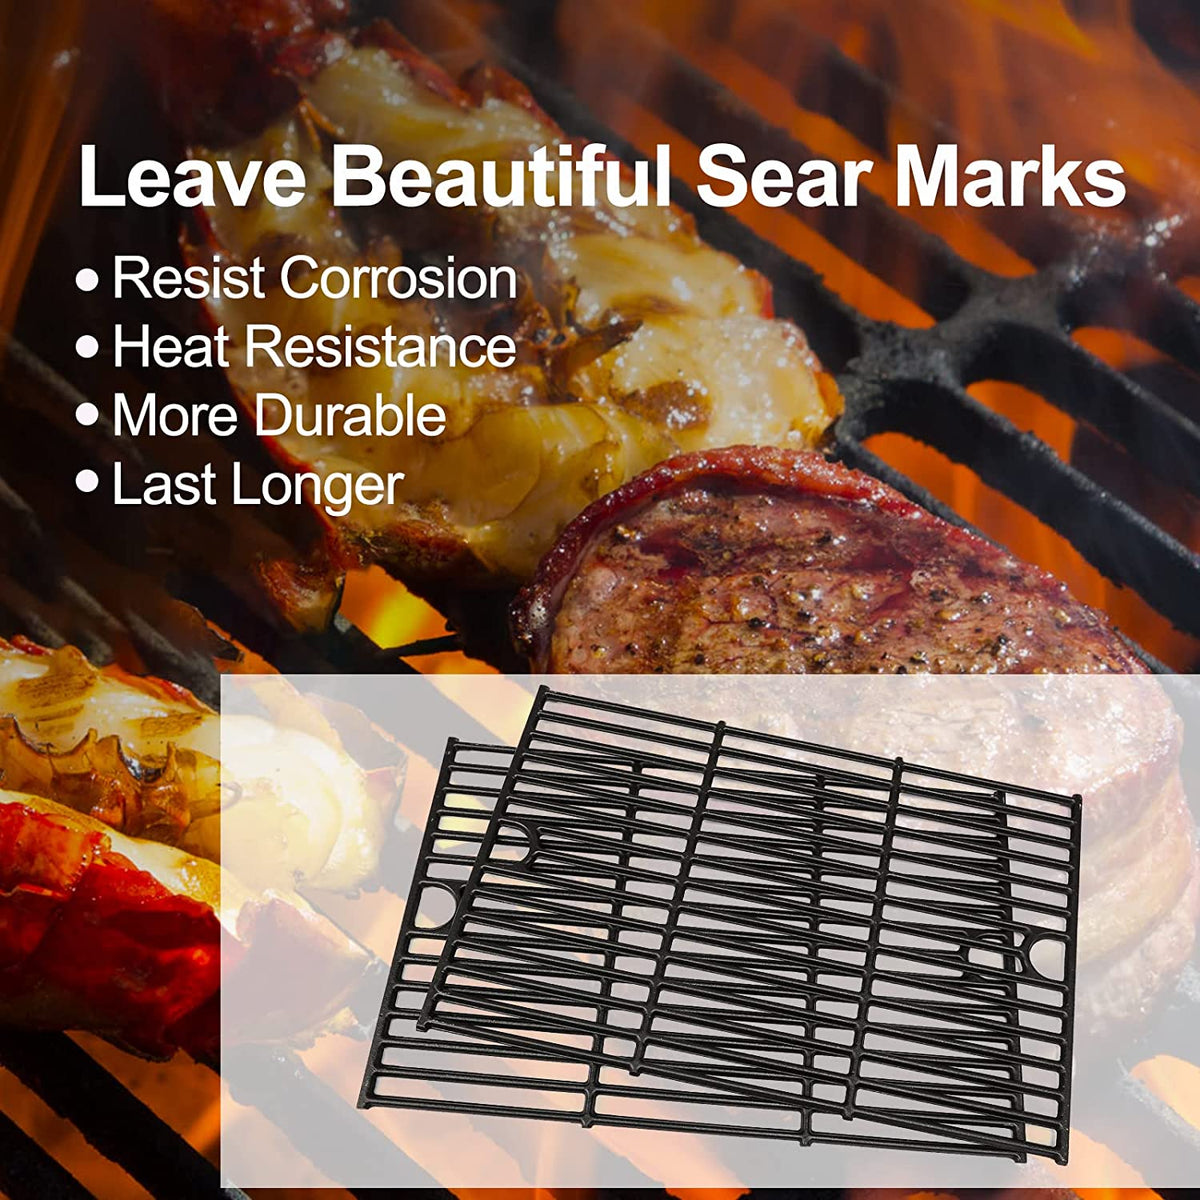 https://www.grillpartsreplacementus.shop/wp-content/uploads/1698/80/cooking-grates-for-pit-boss-austin-xl-pellet-smoker-grills-grillpartsreplacement-online-bbq-parts-retailer-visit-our-online-store-we-have-the-answer-youve-been-looking-for_5.jpg